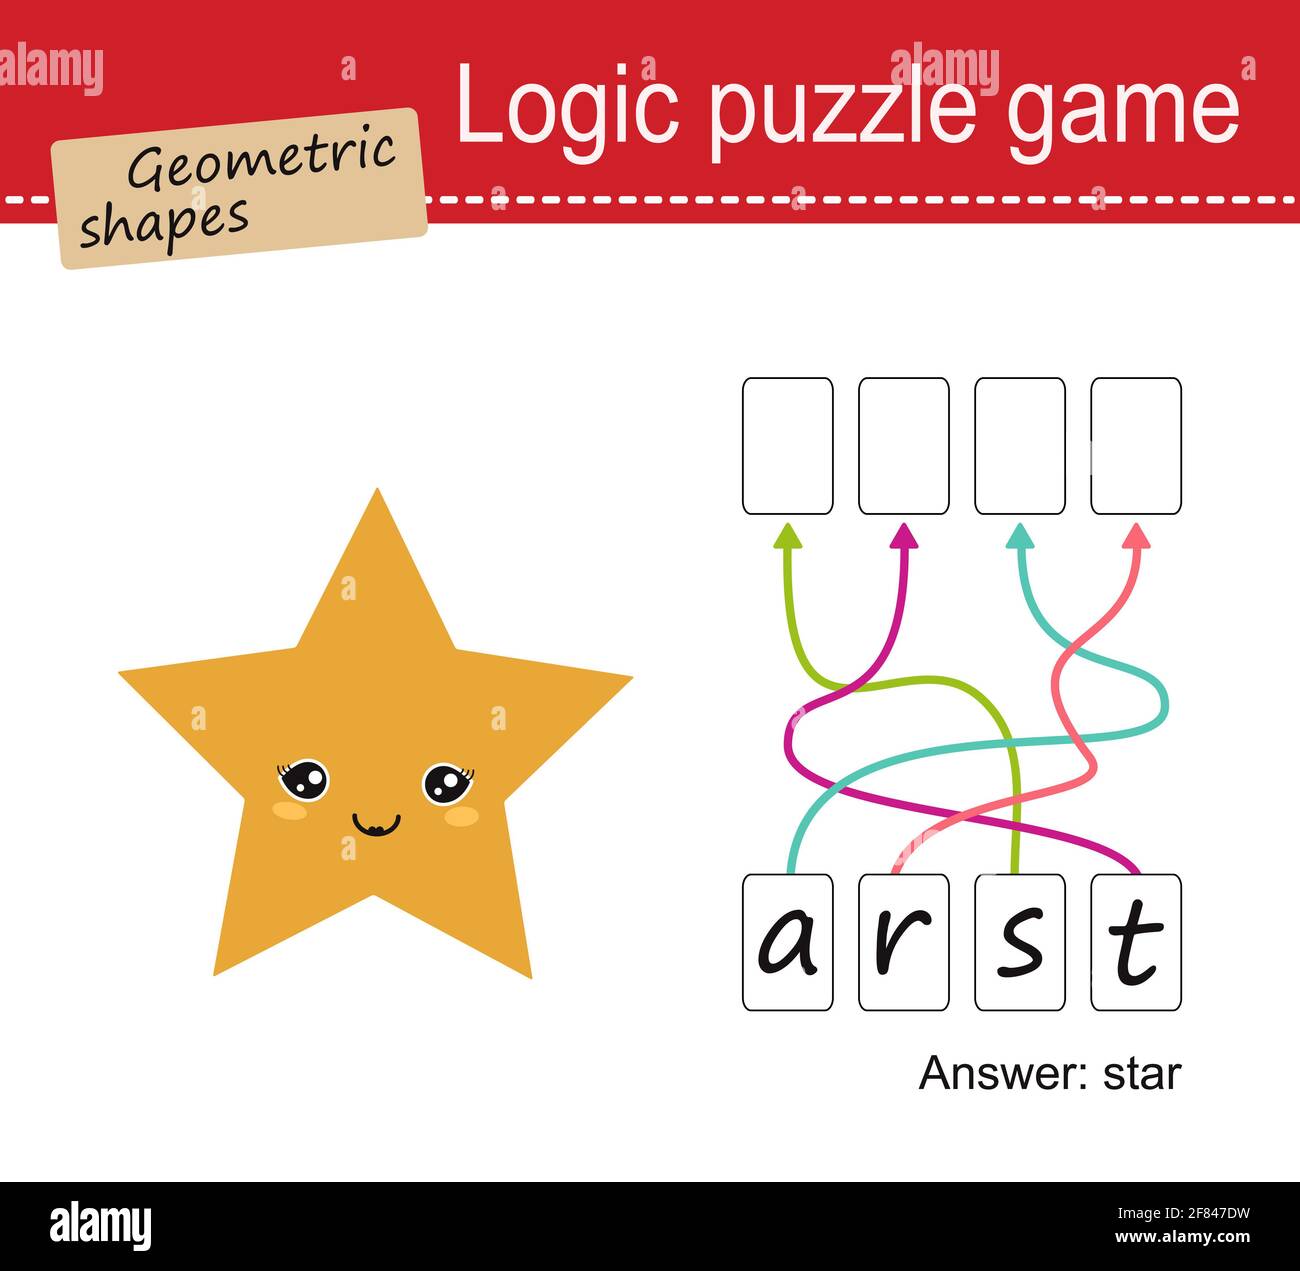 Logic puzzle game for children. Geometric shapes, star. Cartoon flat style. Vector illustration Stock Photo